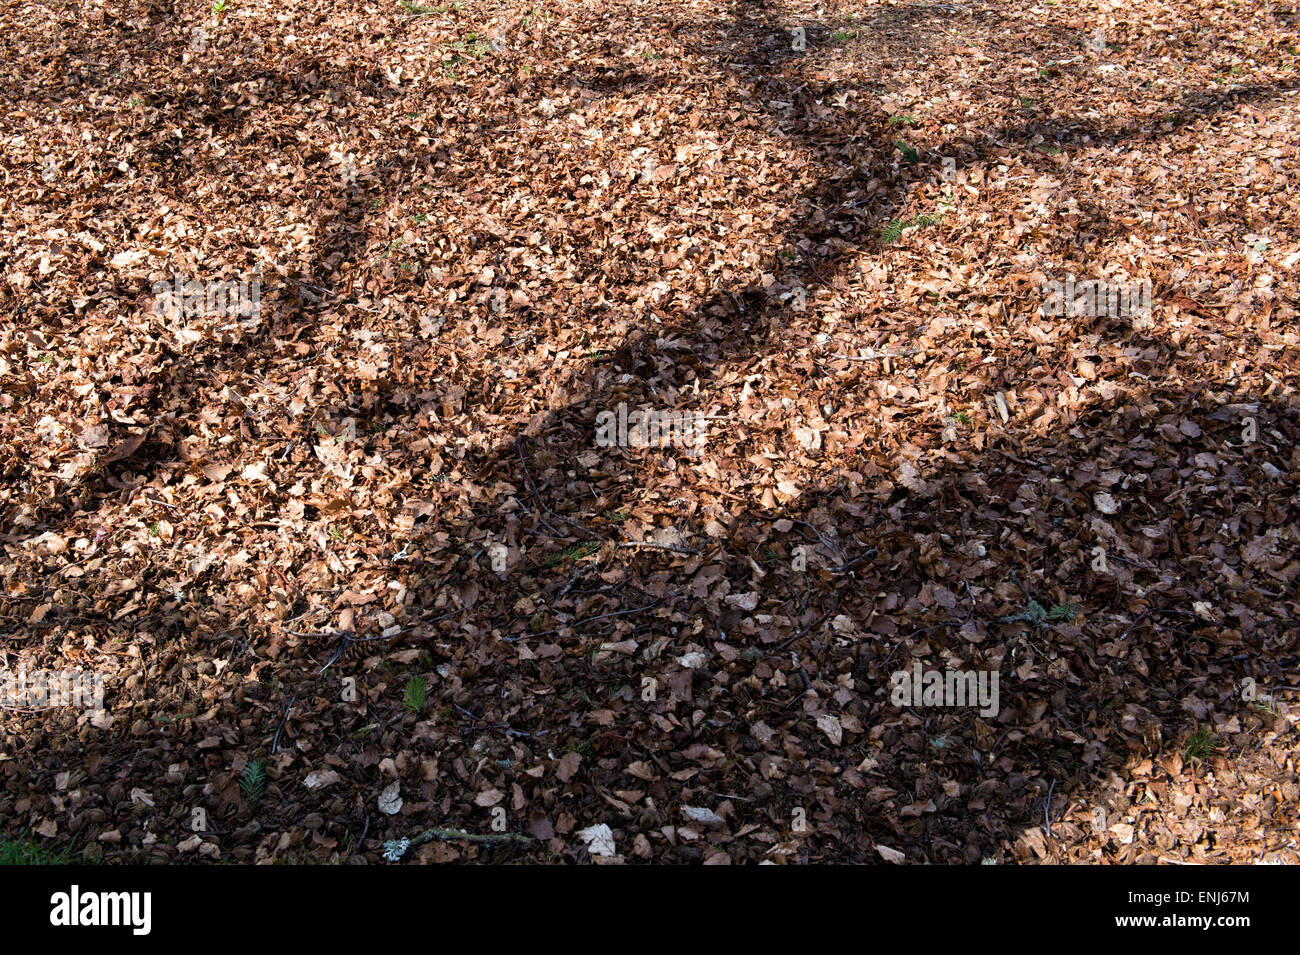 Tree shadow on dead leaves Stock Photo